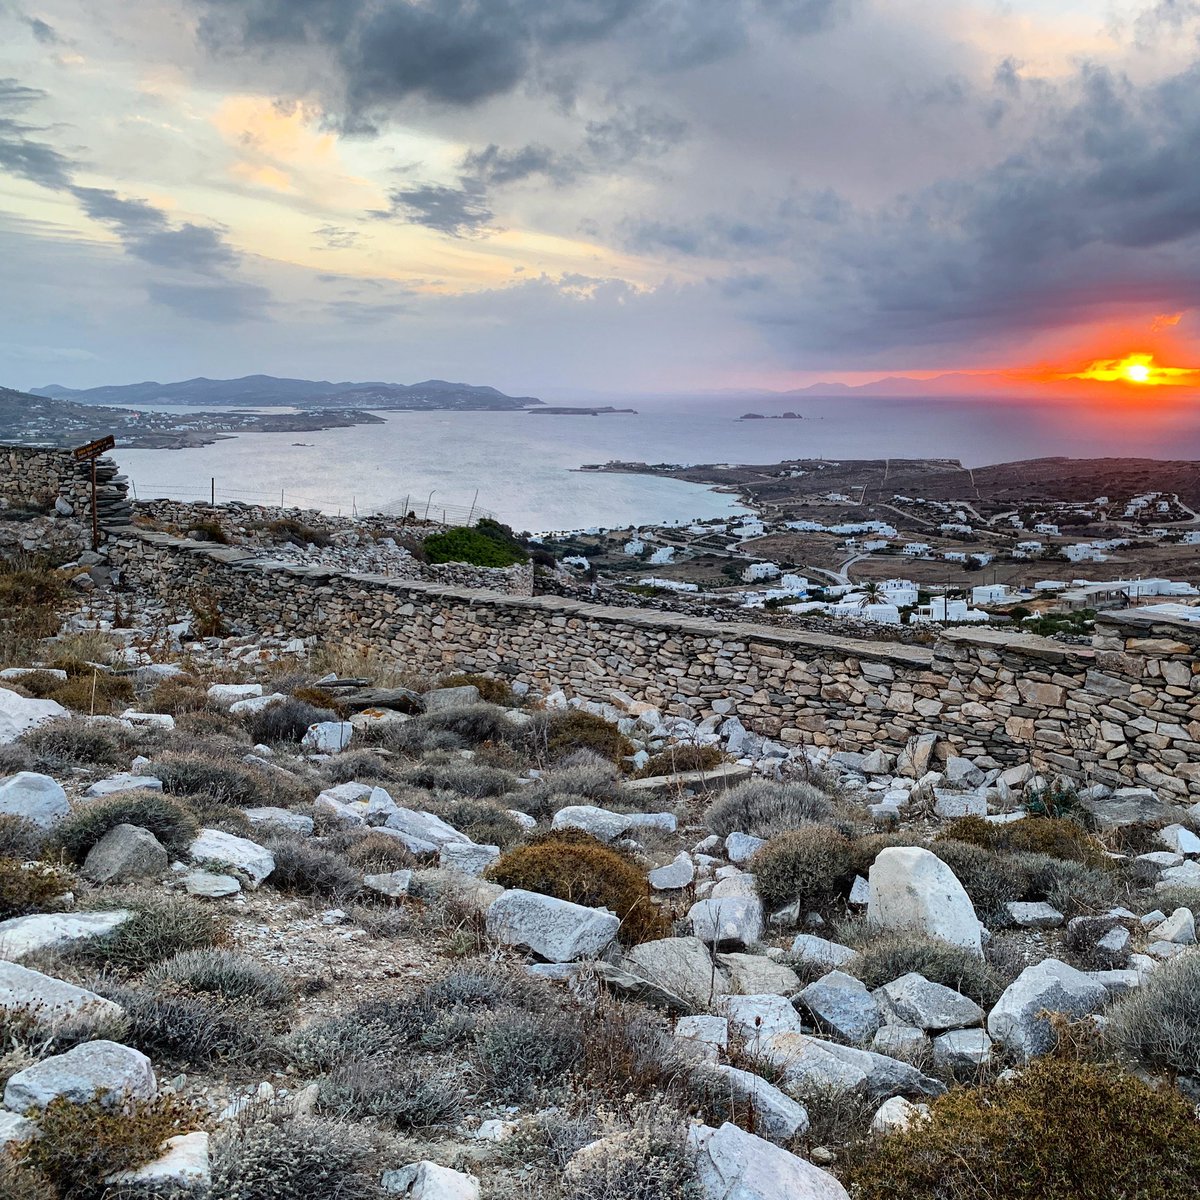 [THREAD] Paros might be best known for its marble, but the island boasts some great archaeological sites, too! Perched above the modern port, the Delion sanctuary of Apollo & Artemis is one of the most picturesque & under-appreciated!1/9.. #greece  #archaeology  #travel